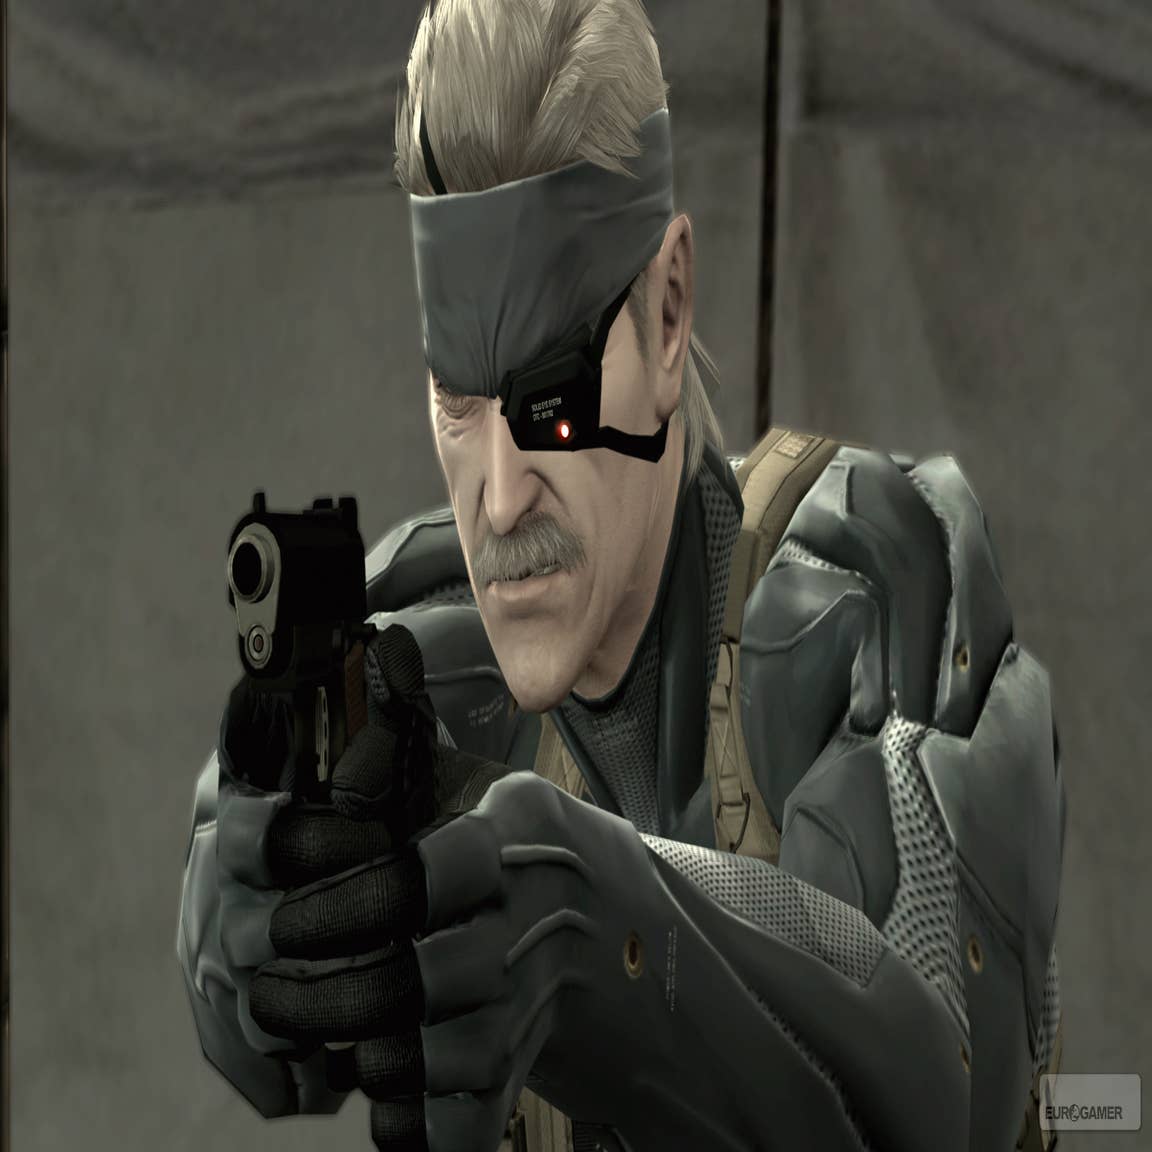 Metal Gear Solid 4 is 14 years old today, with the last physical appearance  of Solid Snake in the franchise. All the next games involved different  protagonist. it's wild to think more